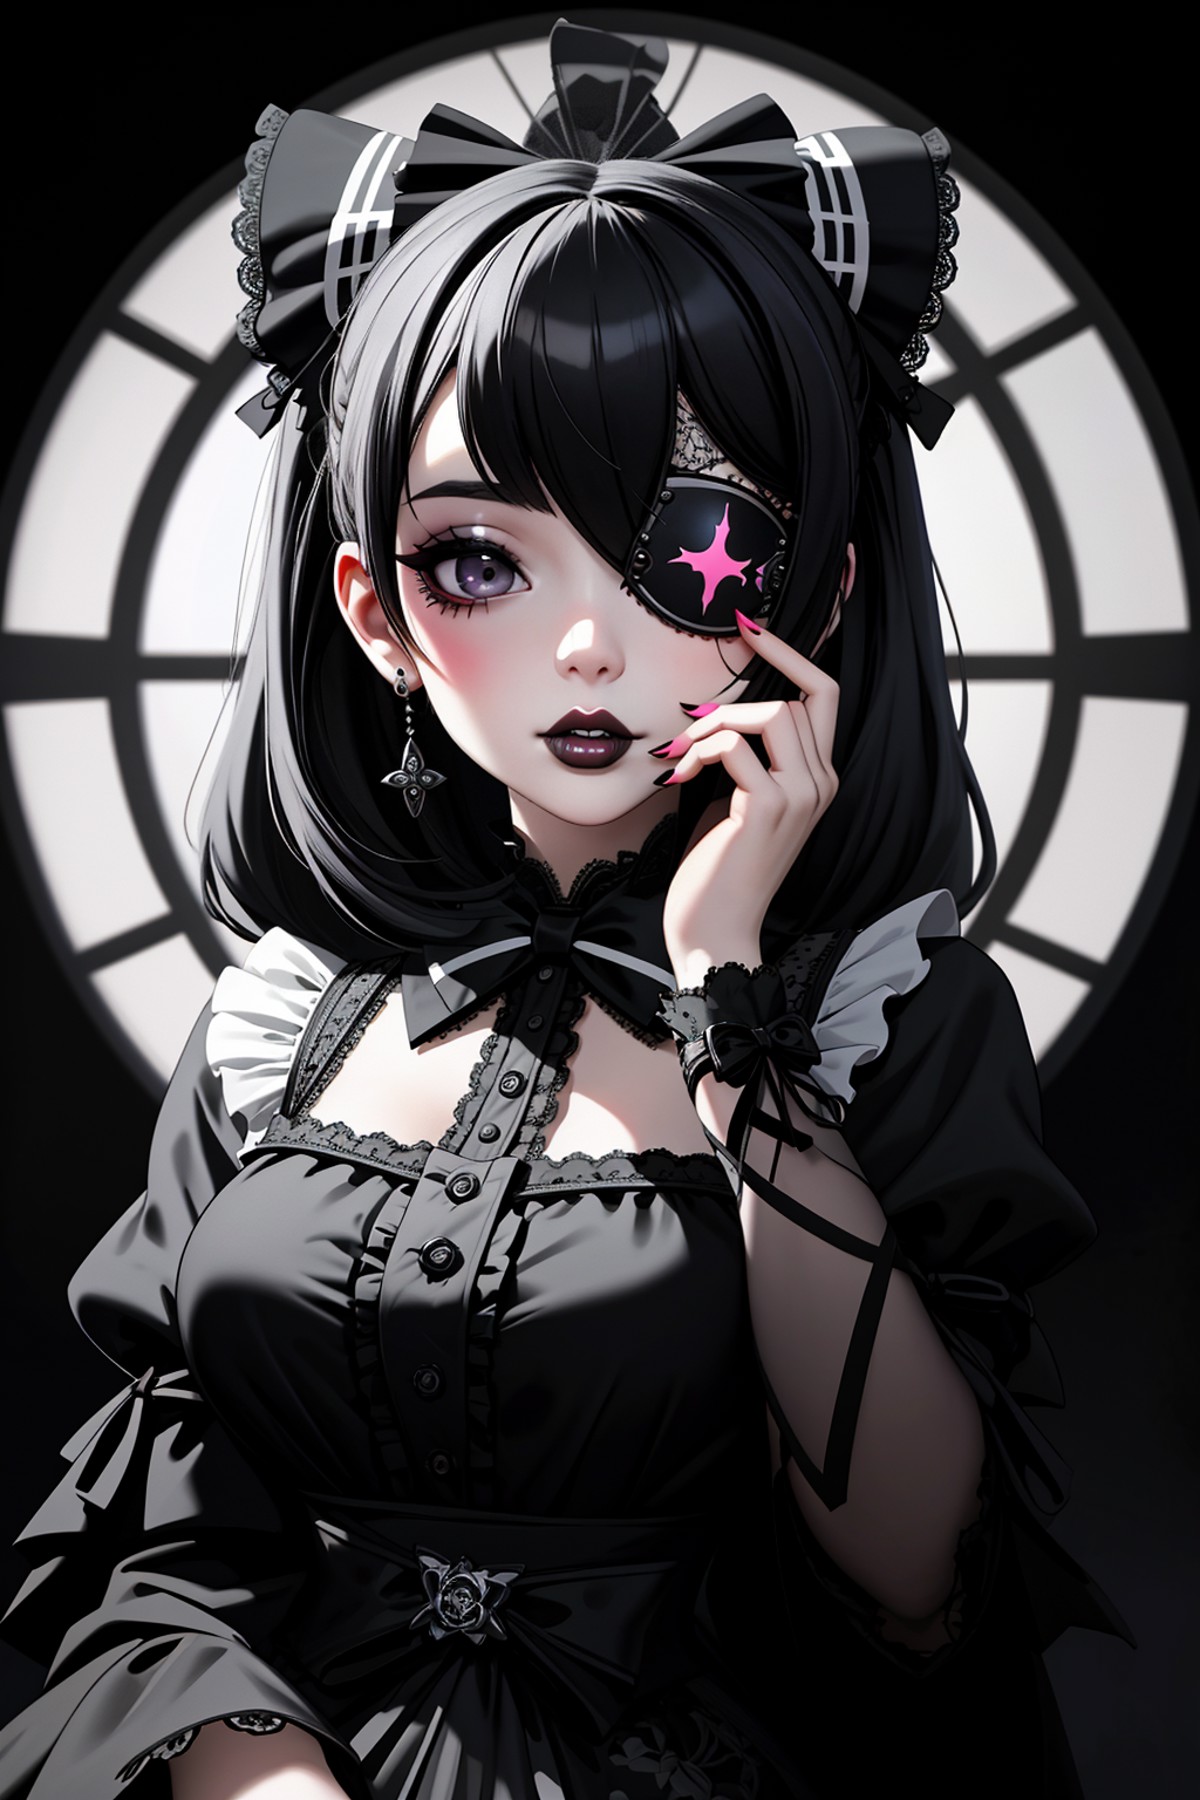 ((Masterpiece, best quality)), edgQuality,bimbo,glossy,
GothGal, a woman in a black and white dress,ribbon,lace,goth print...